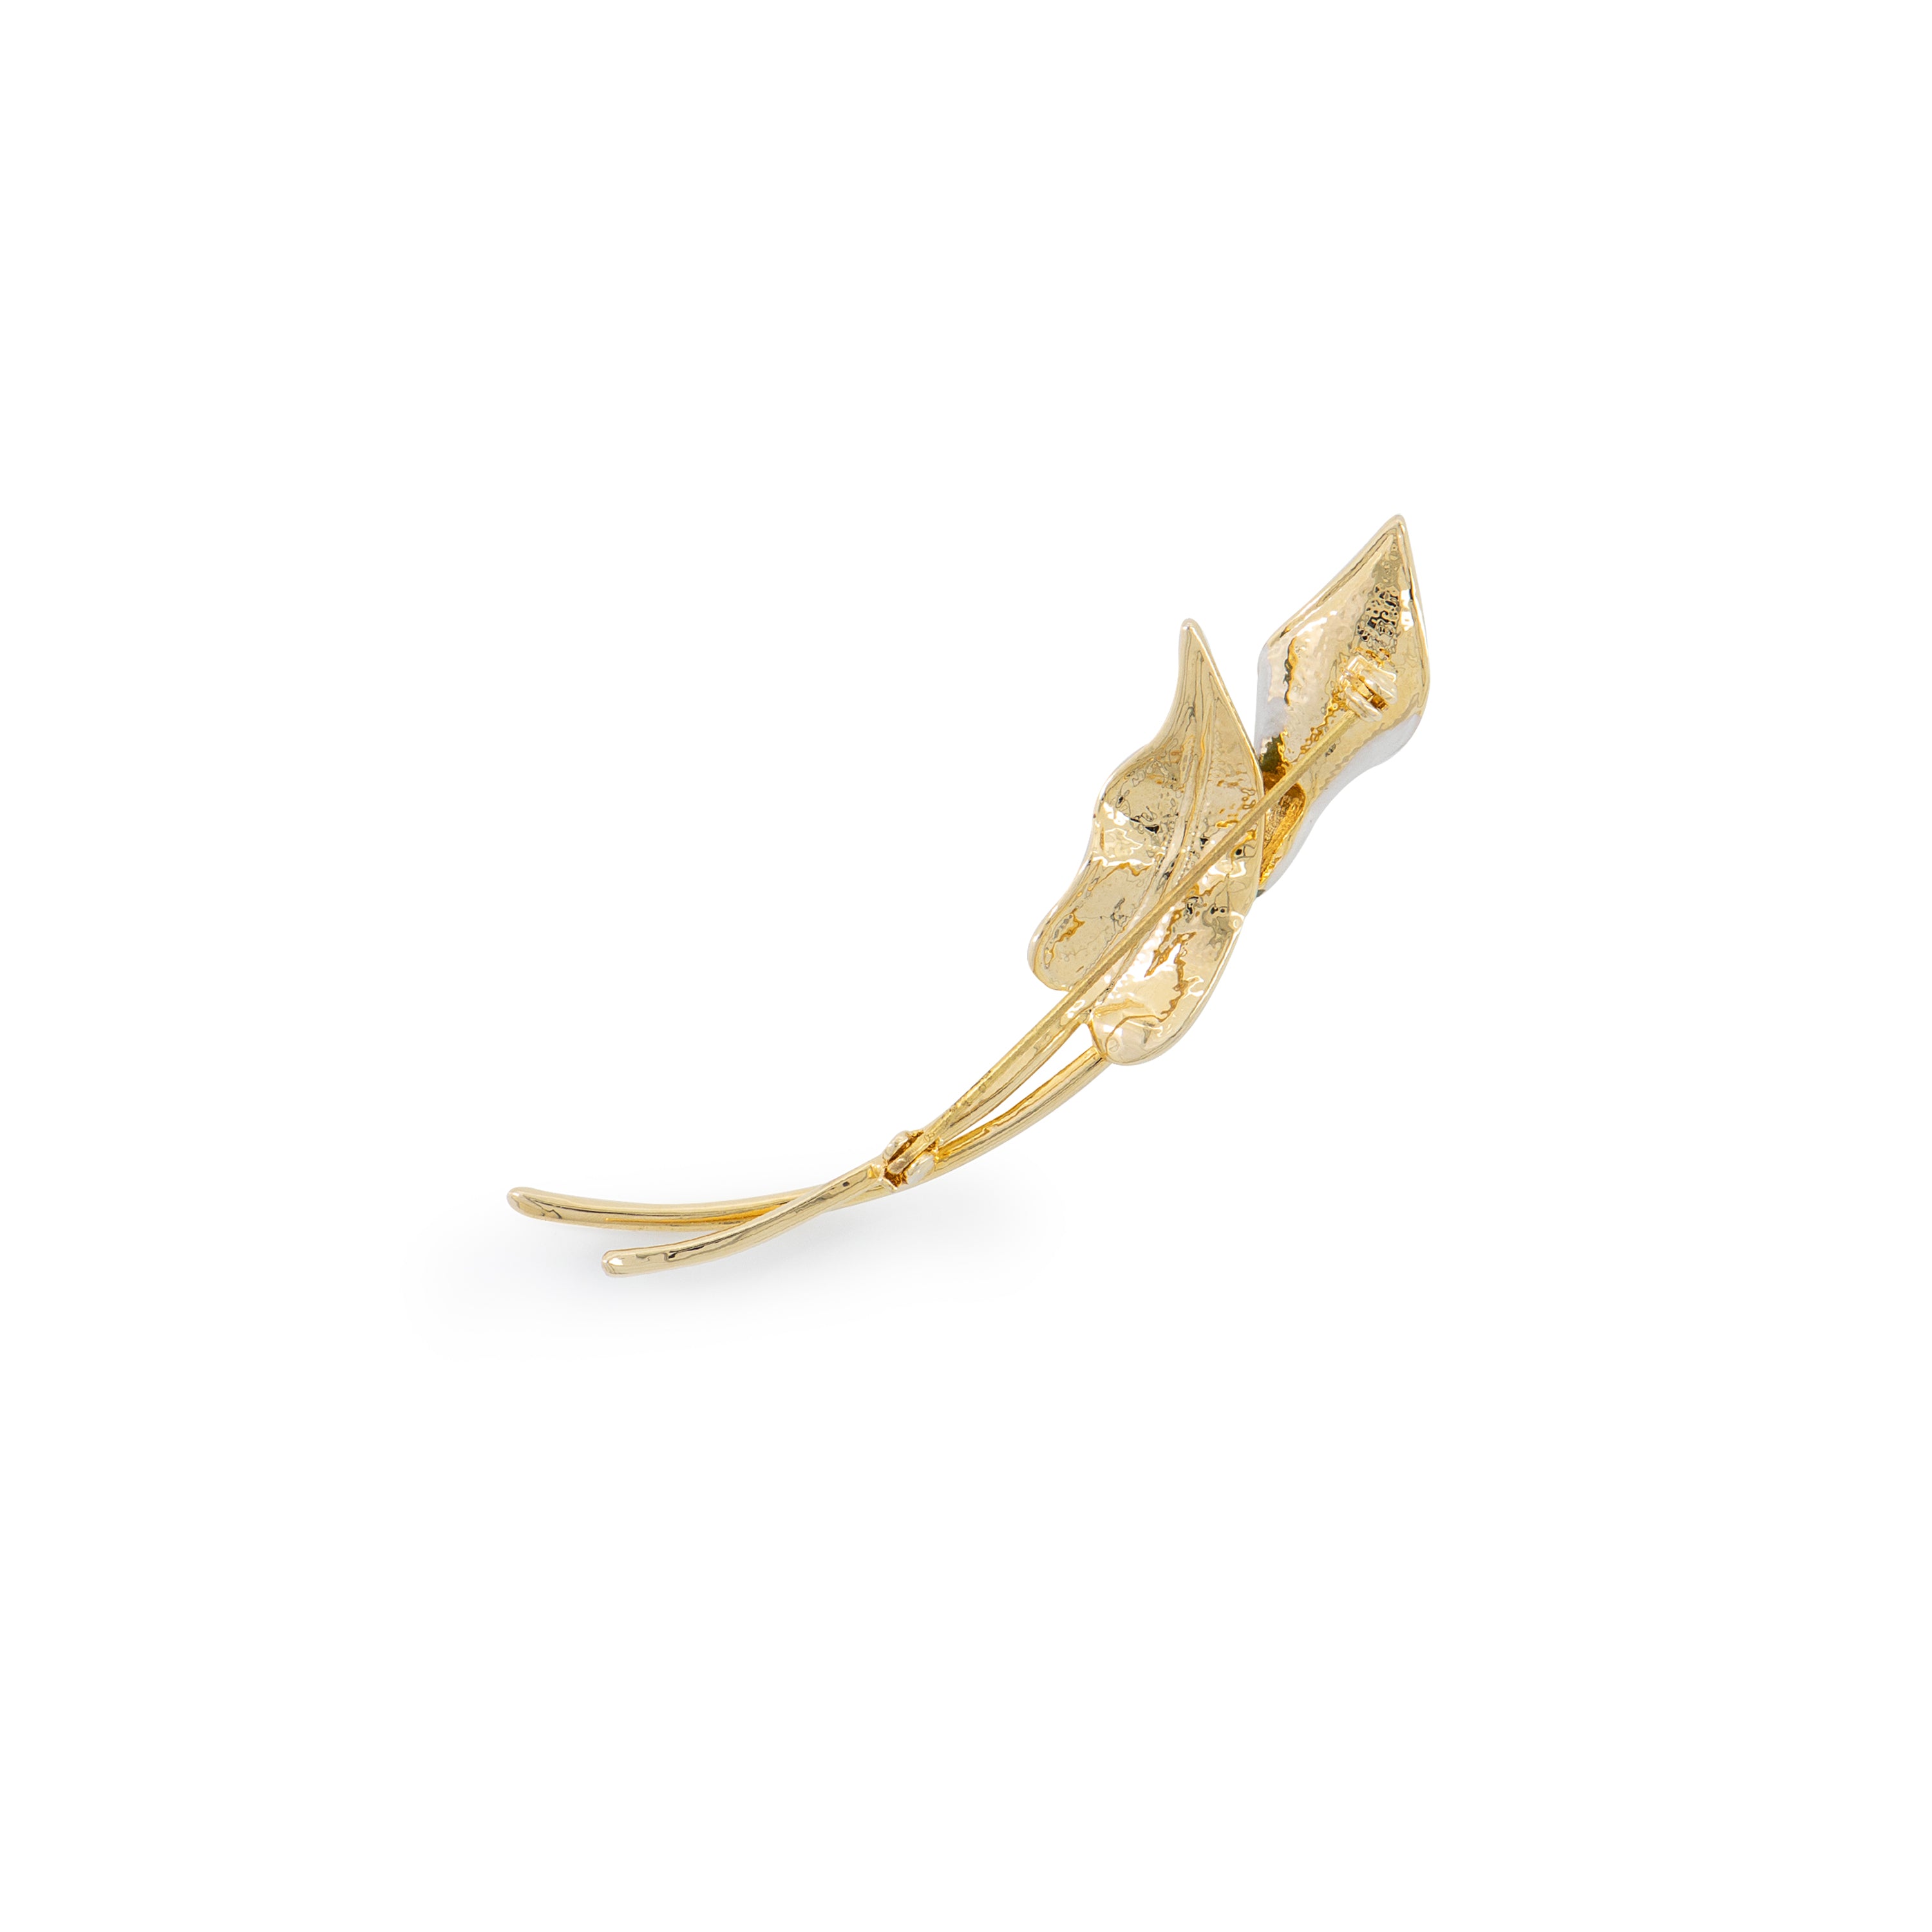 Costume Calla Lily flower brooch back and clasp view